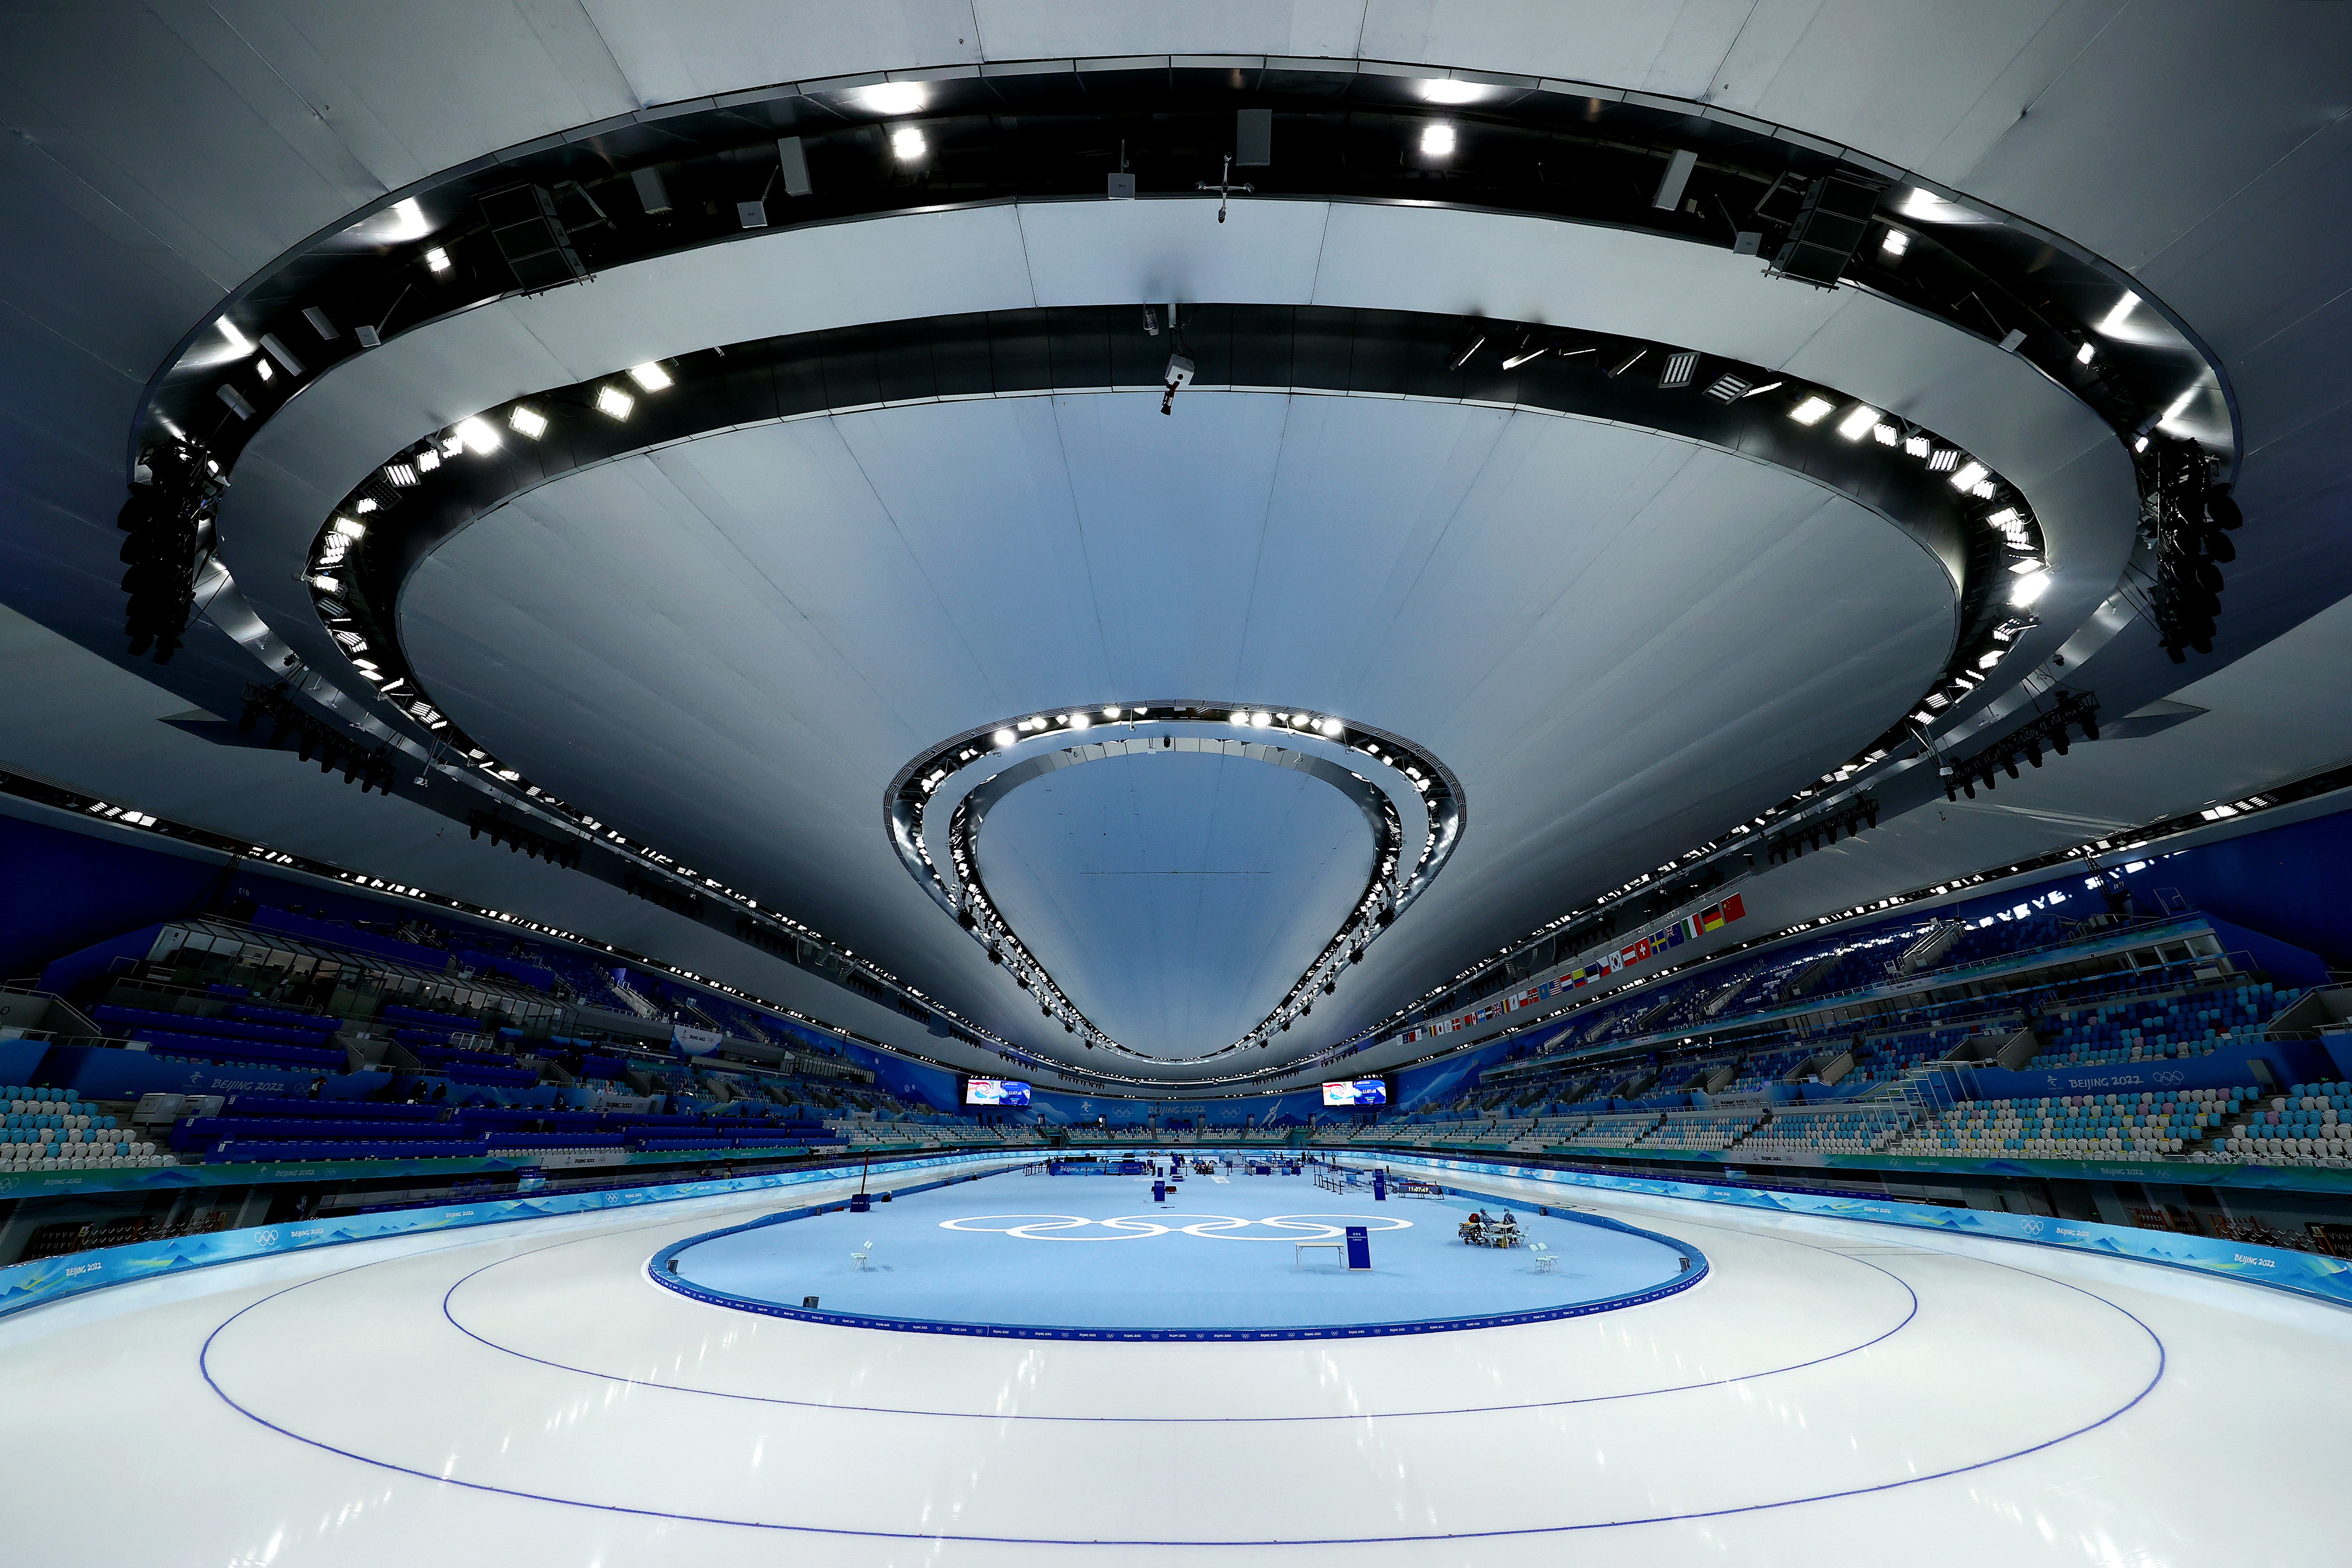 The National Speed Skating Oval is hosting the speed skating in Beijing